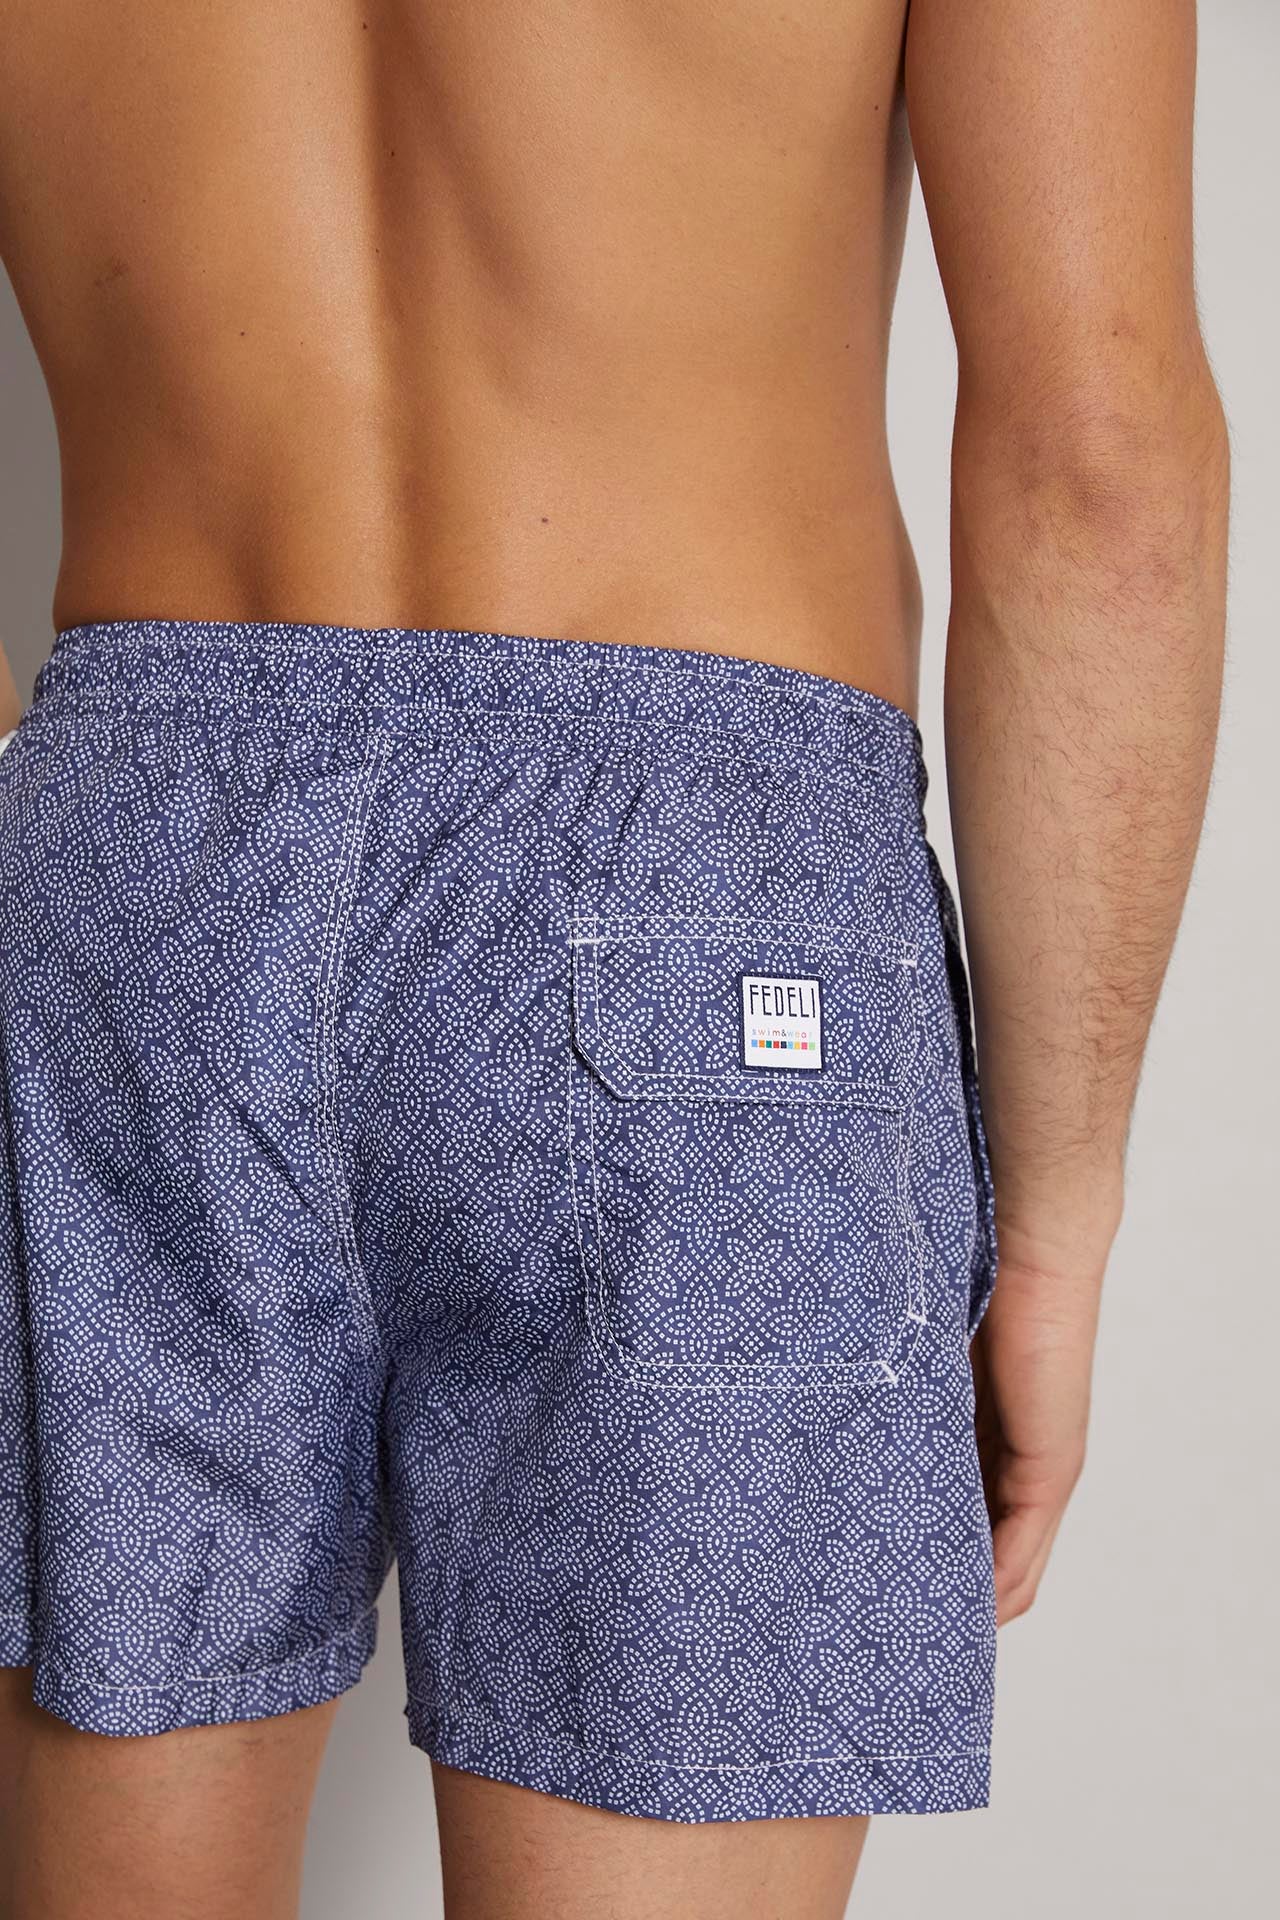 Madeira - the sustainable swim trunk - dots pattern